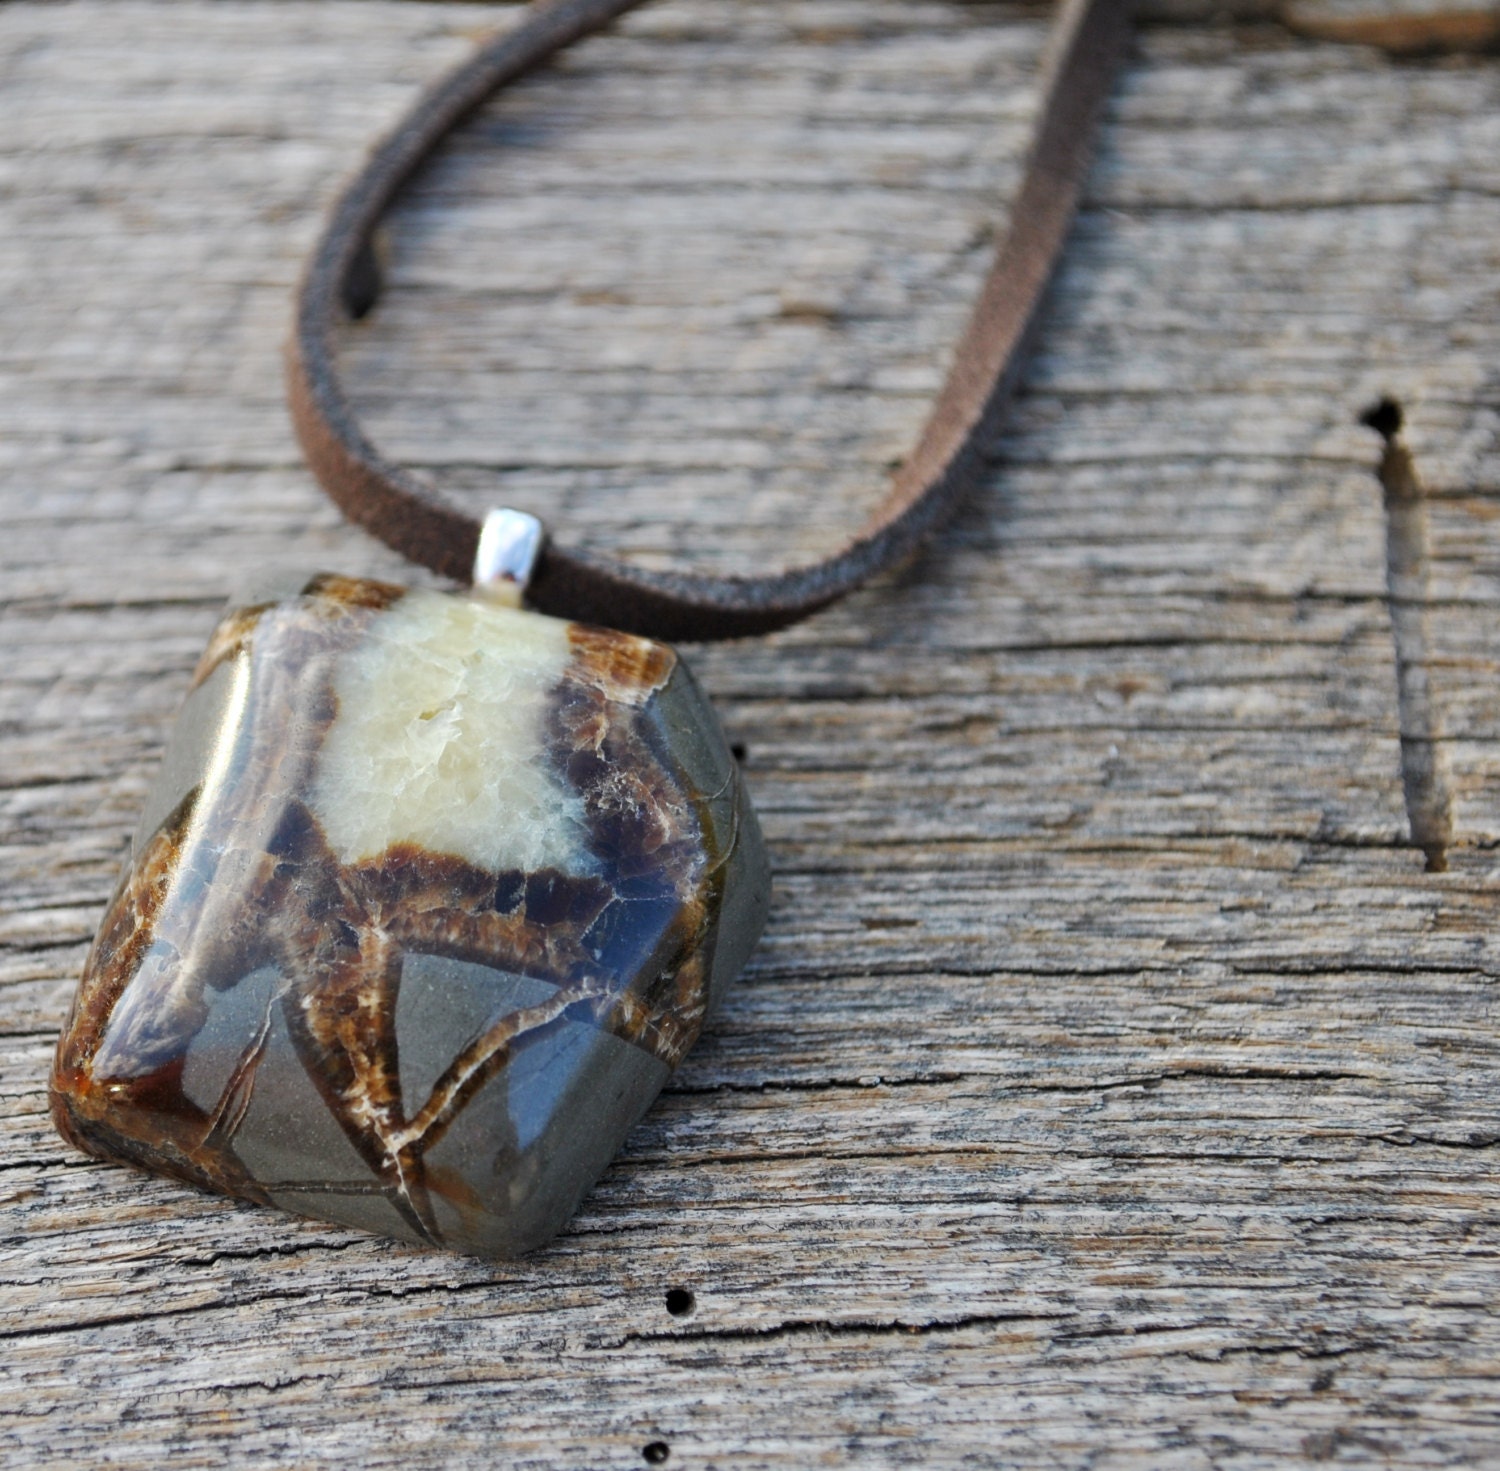 Men's Utah Septarian Nodule Pendant on a brown leather cord necklace chain simple, minimalist - Beechtree